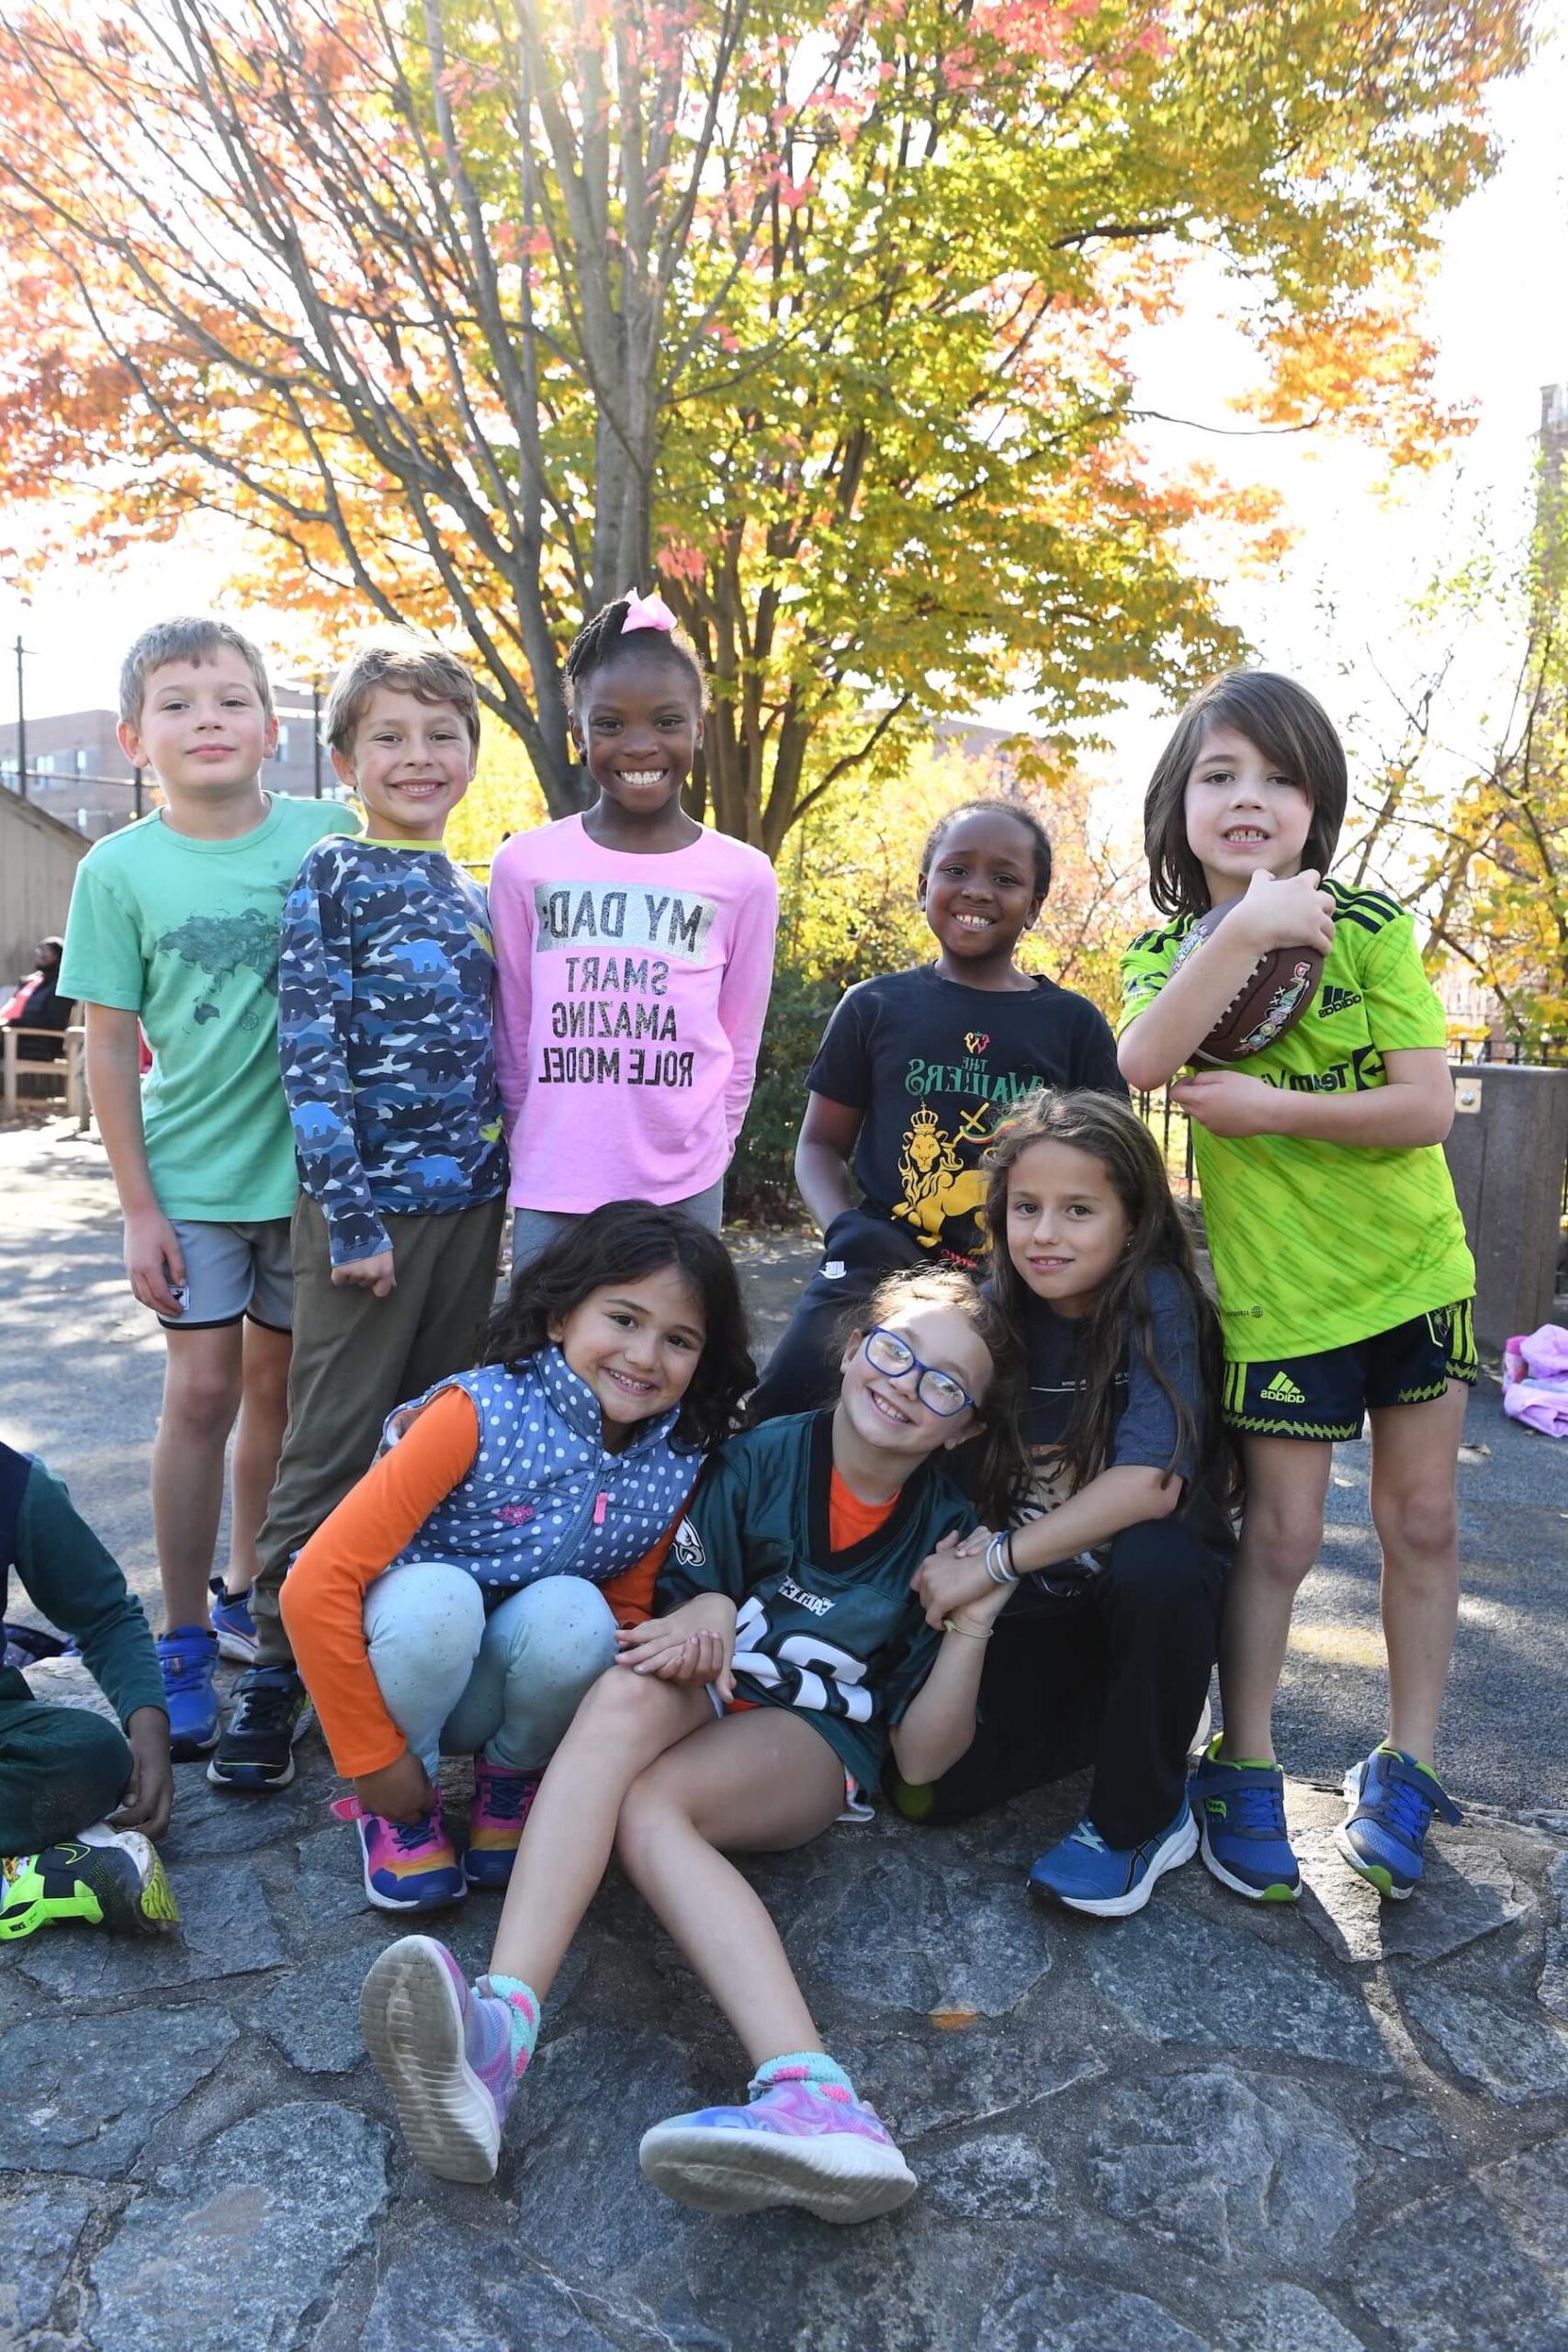 Ethical Culture Fieldston School group of Fieldston Lower students smiling at the camera